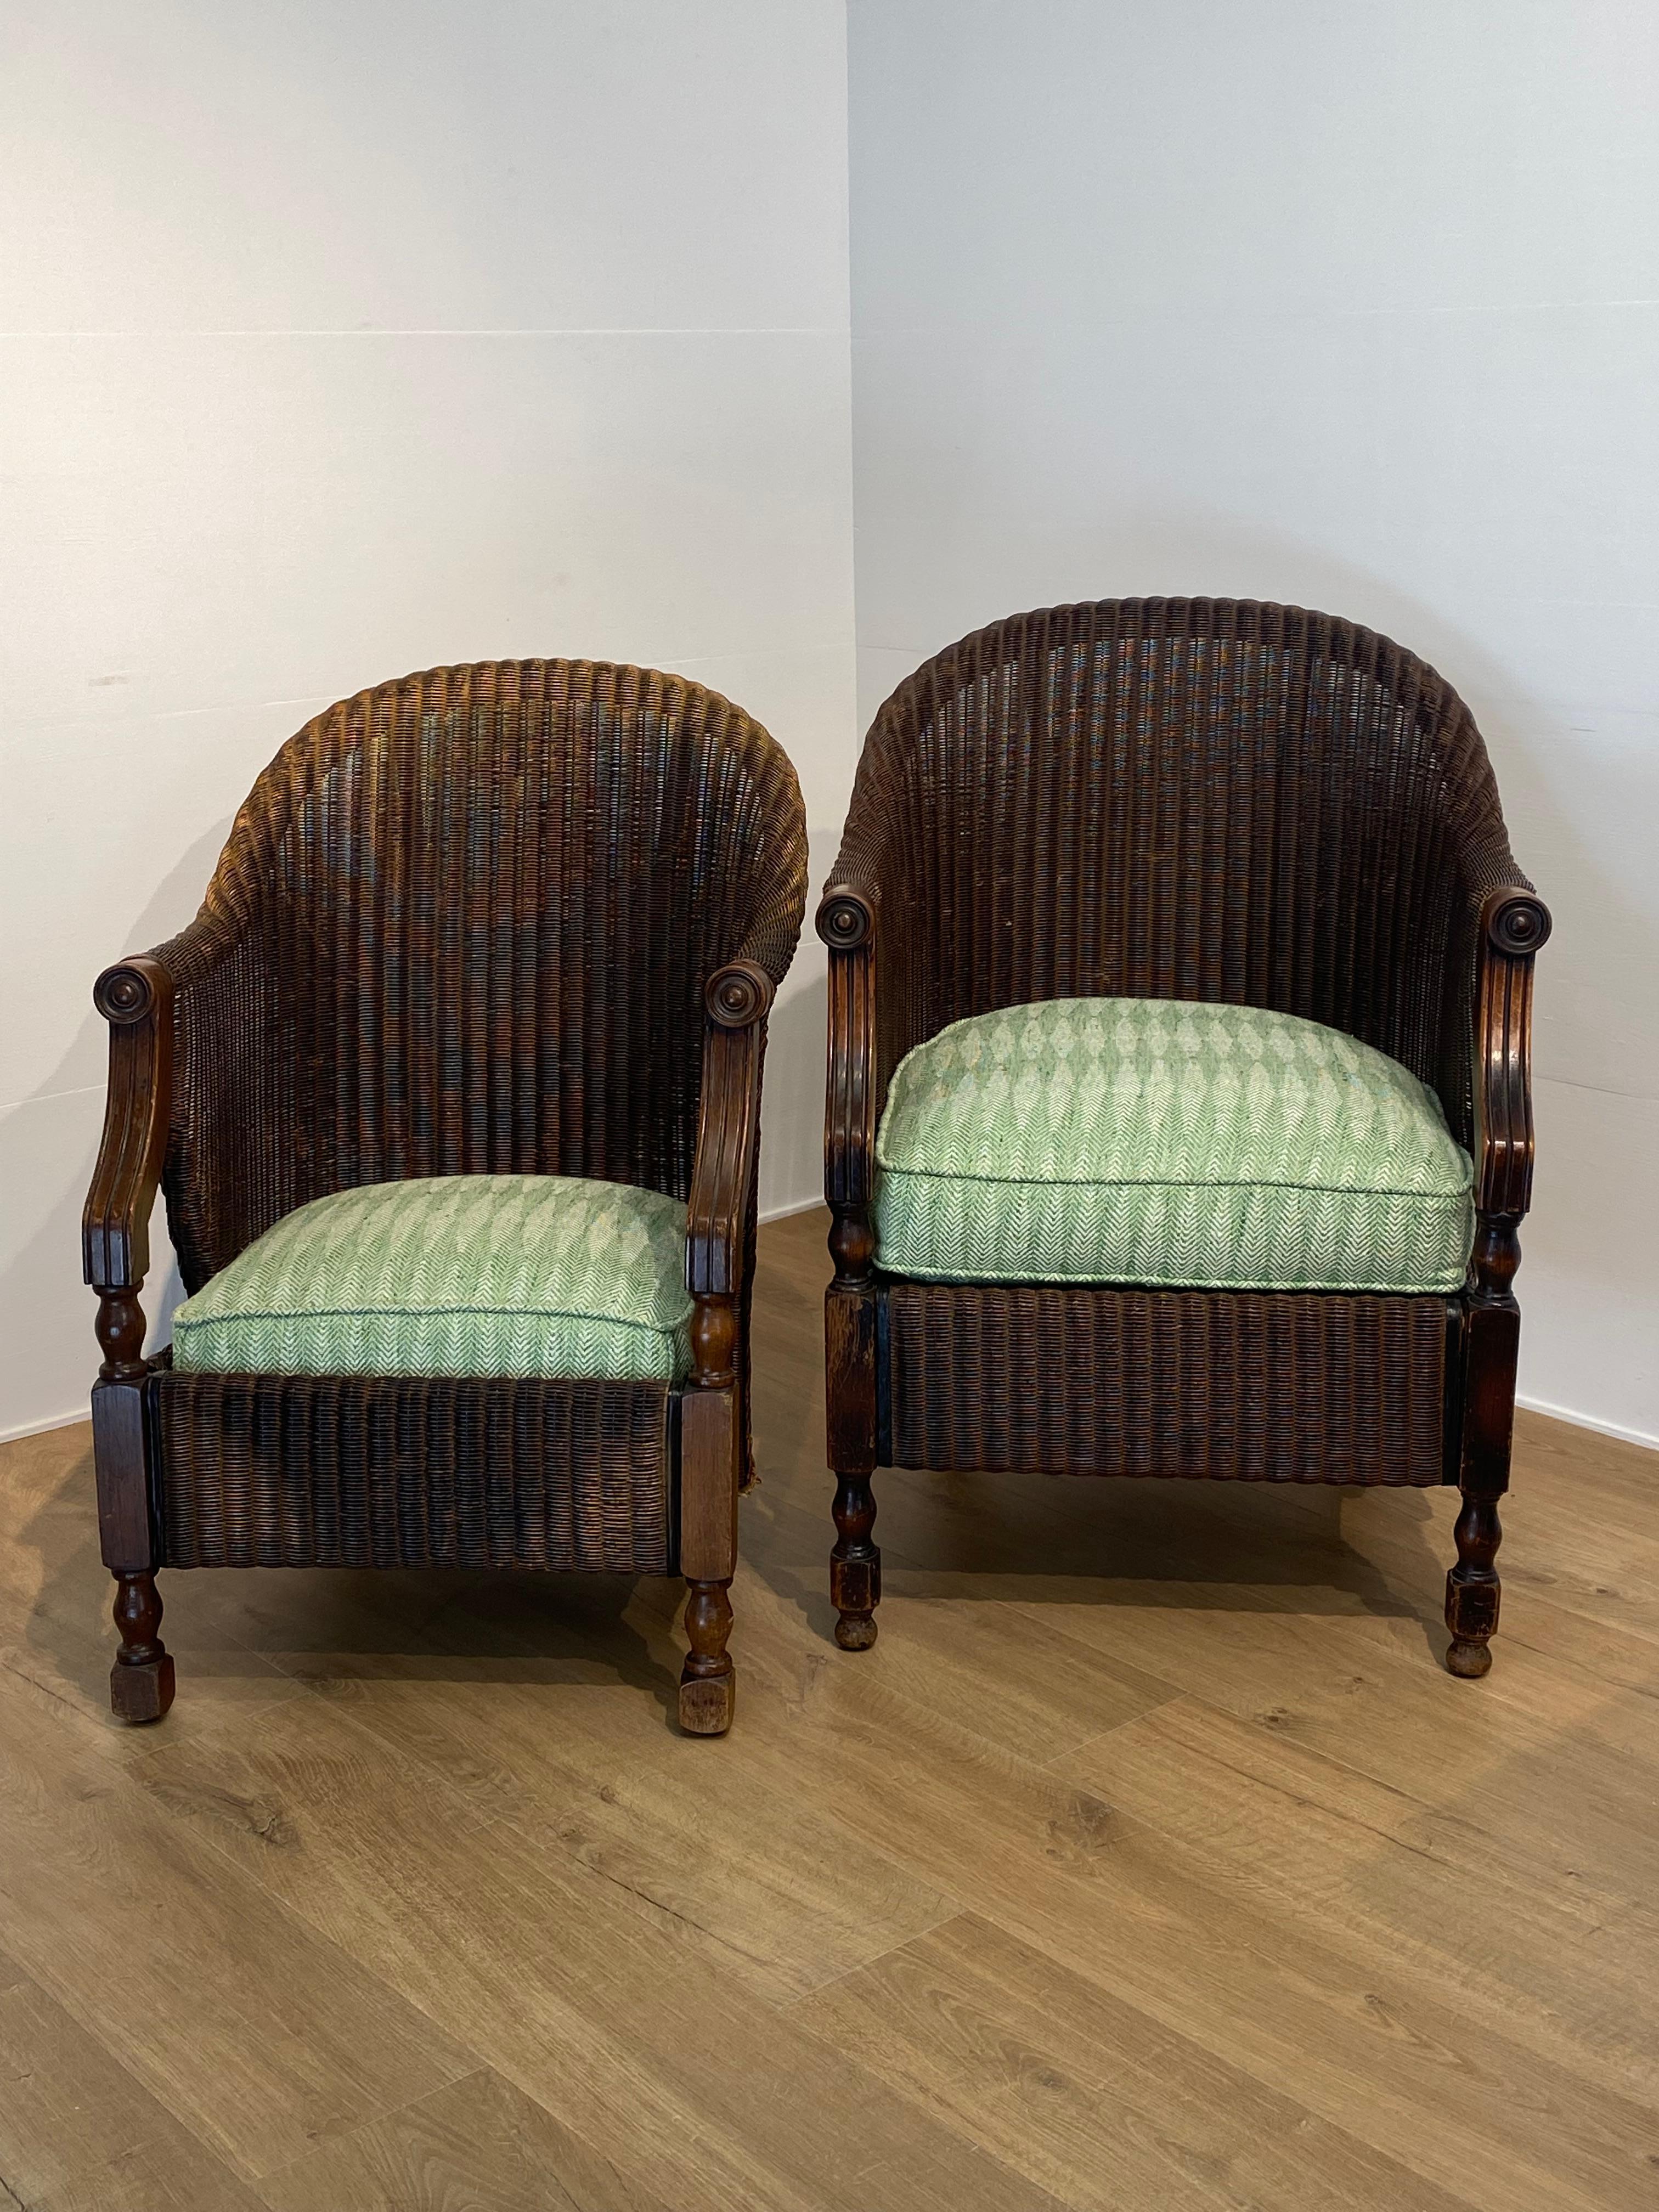 British Pair of antique Loyd Loom Chairs In Rattan For Sale